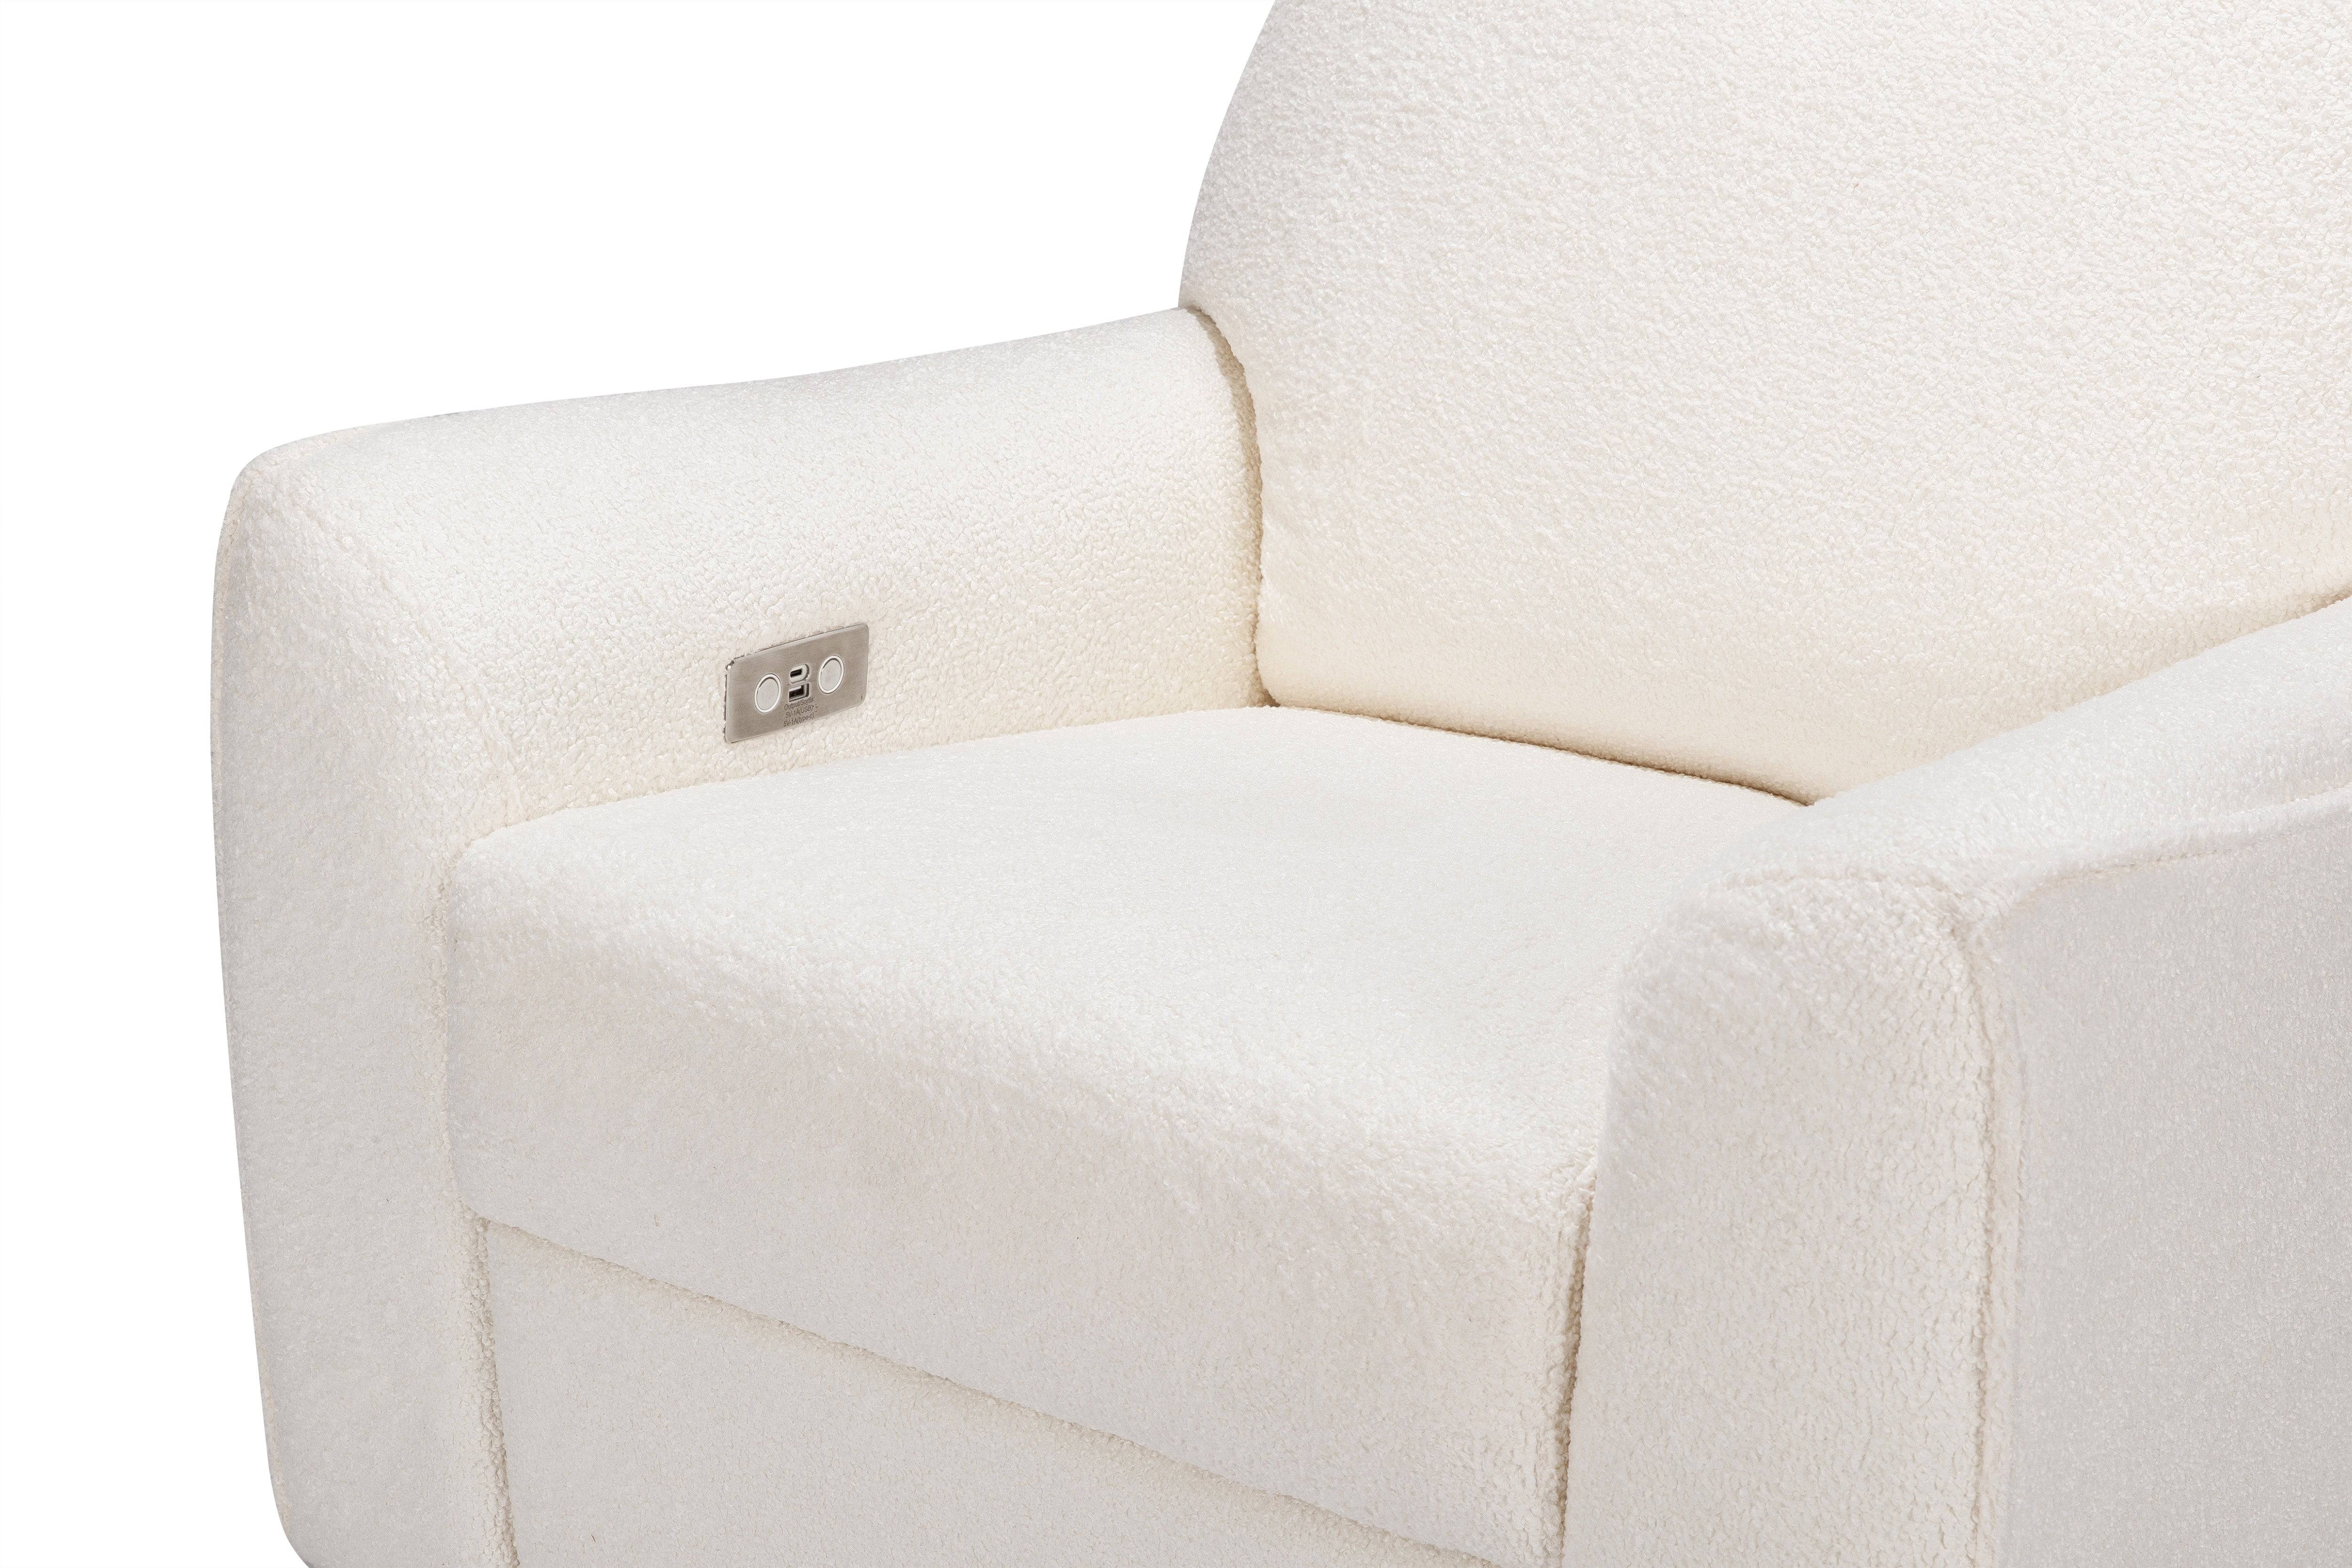 Sunday Power Recliner and Swivel Glider in Chantilly Sherpa with Light Wood Base - Twinkle Twinkle Little One